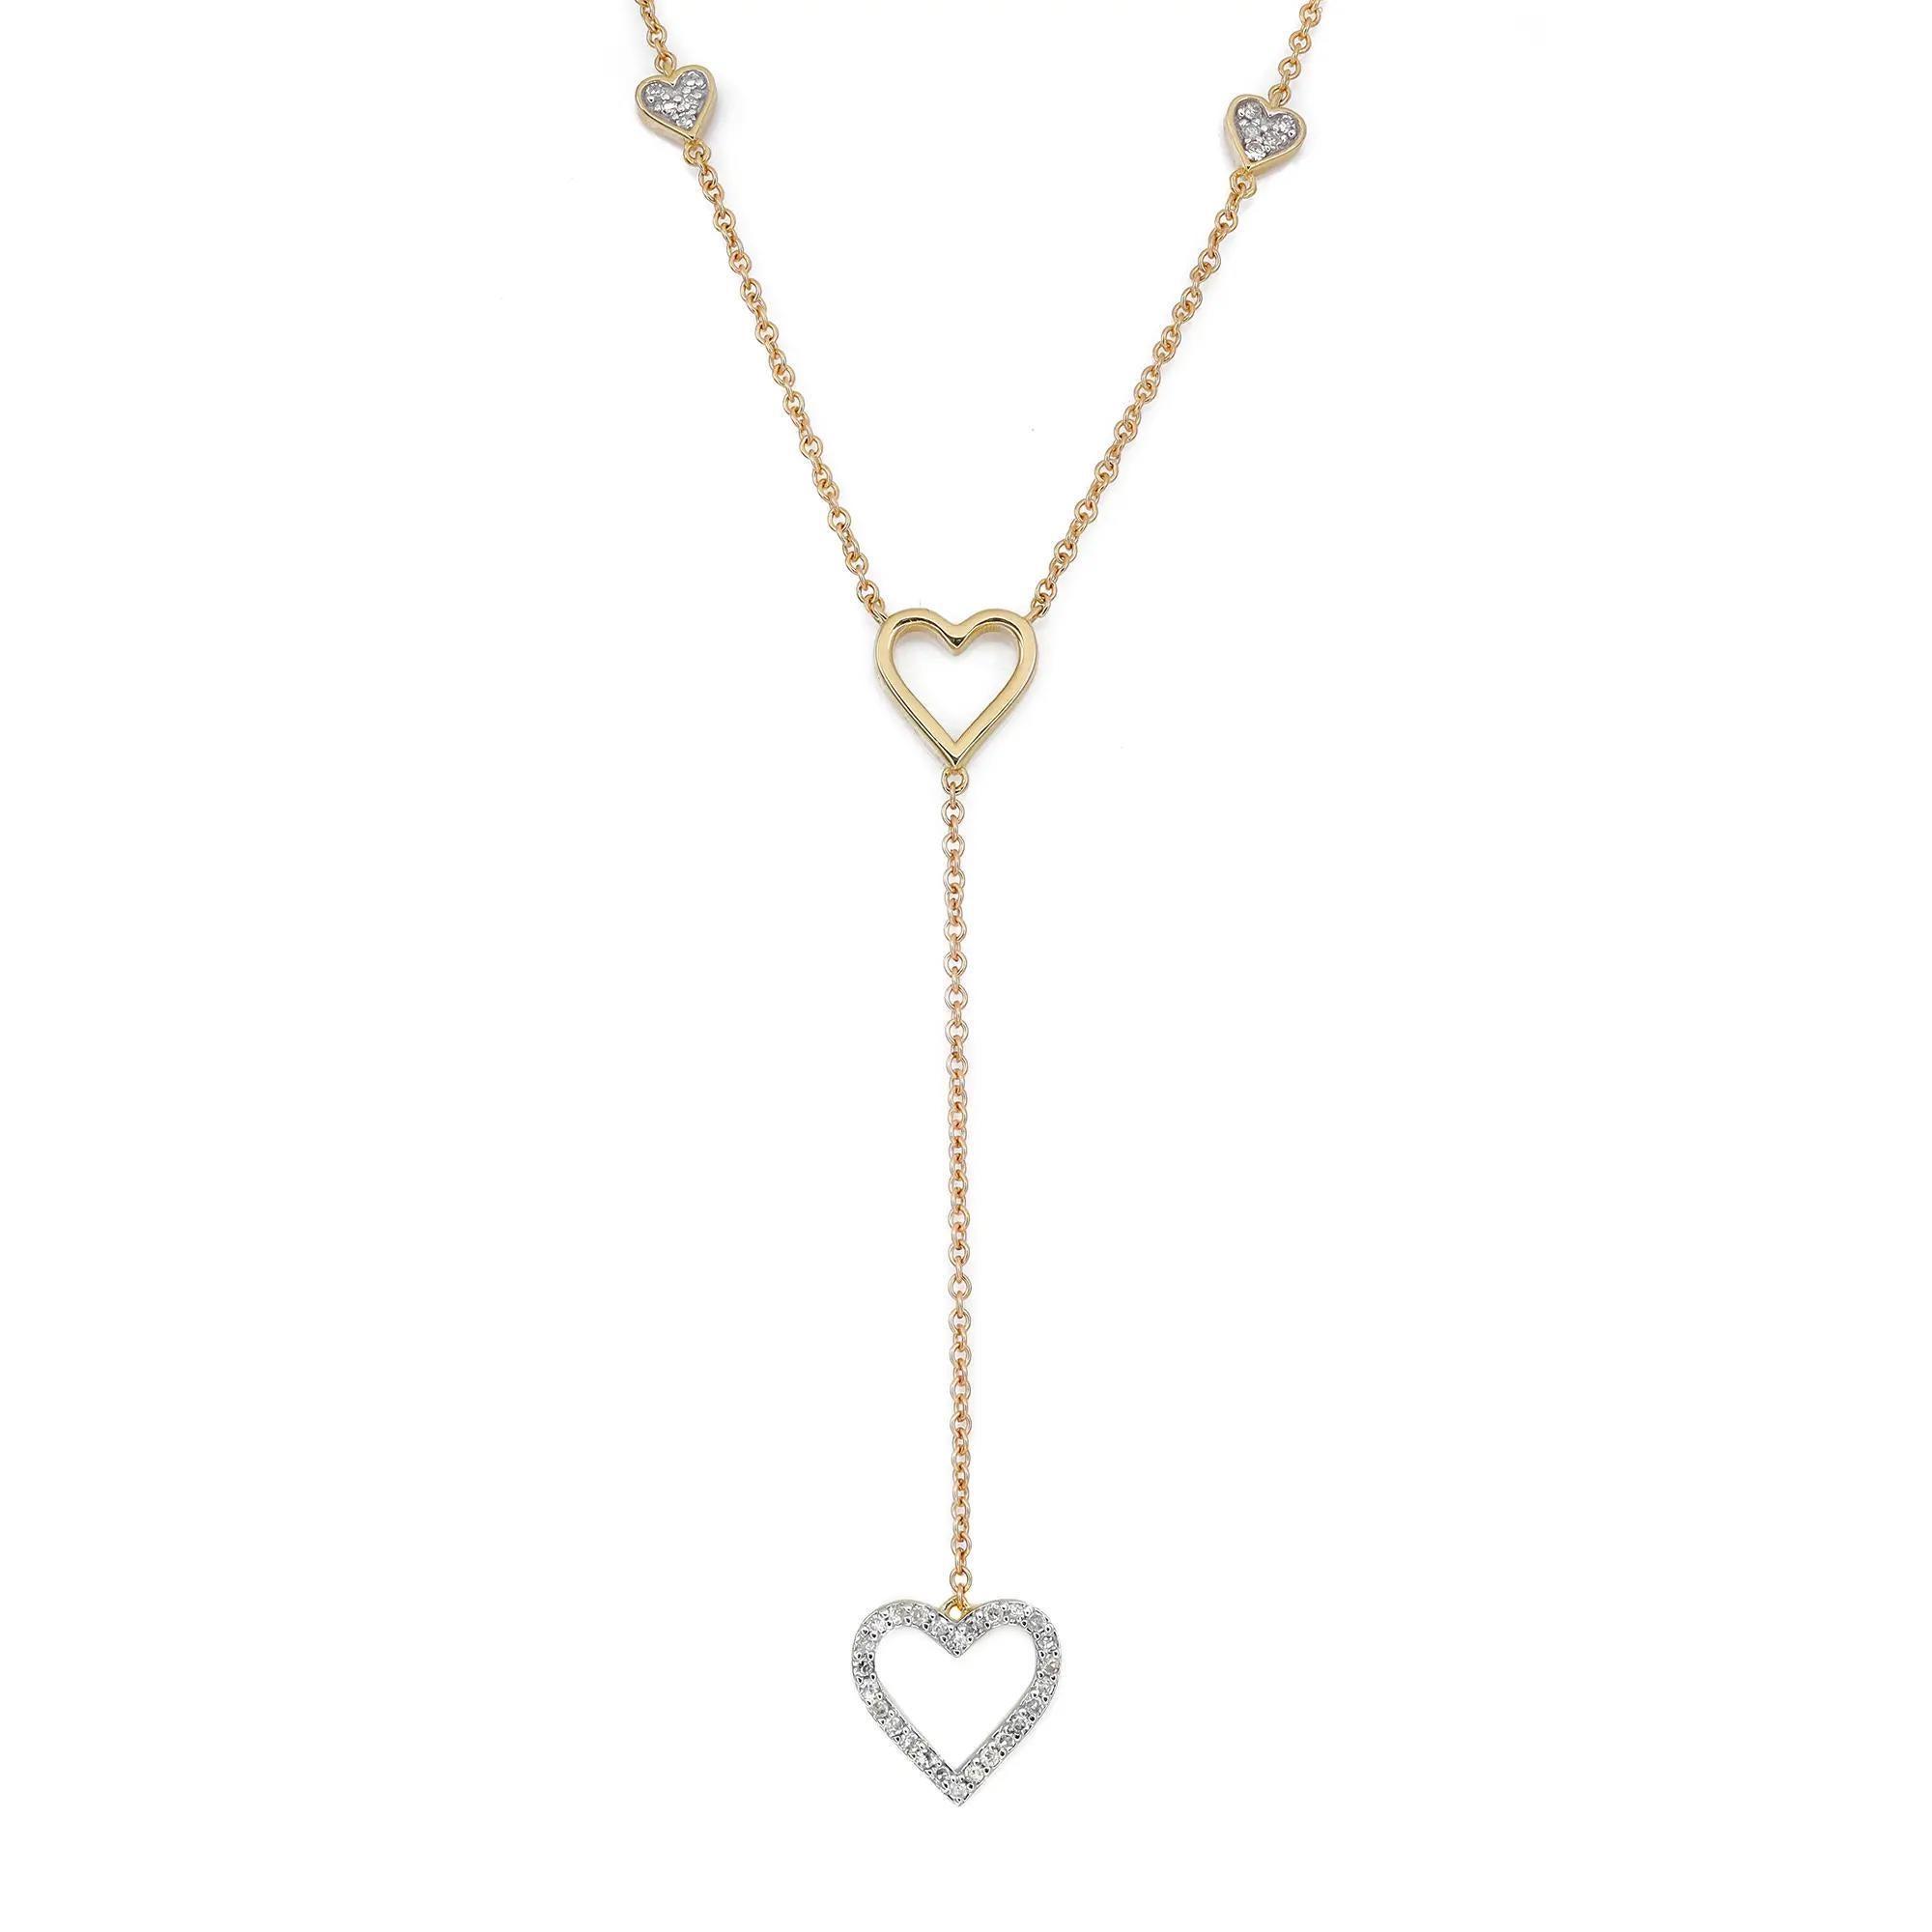 Diamond Heart Lariat Necklace Round Cut In 14K Yellow Gold 0.14Cttw For Sale 1